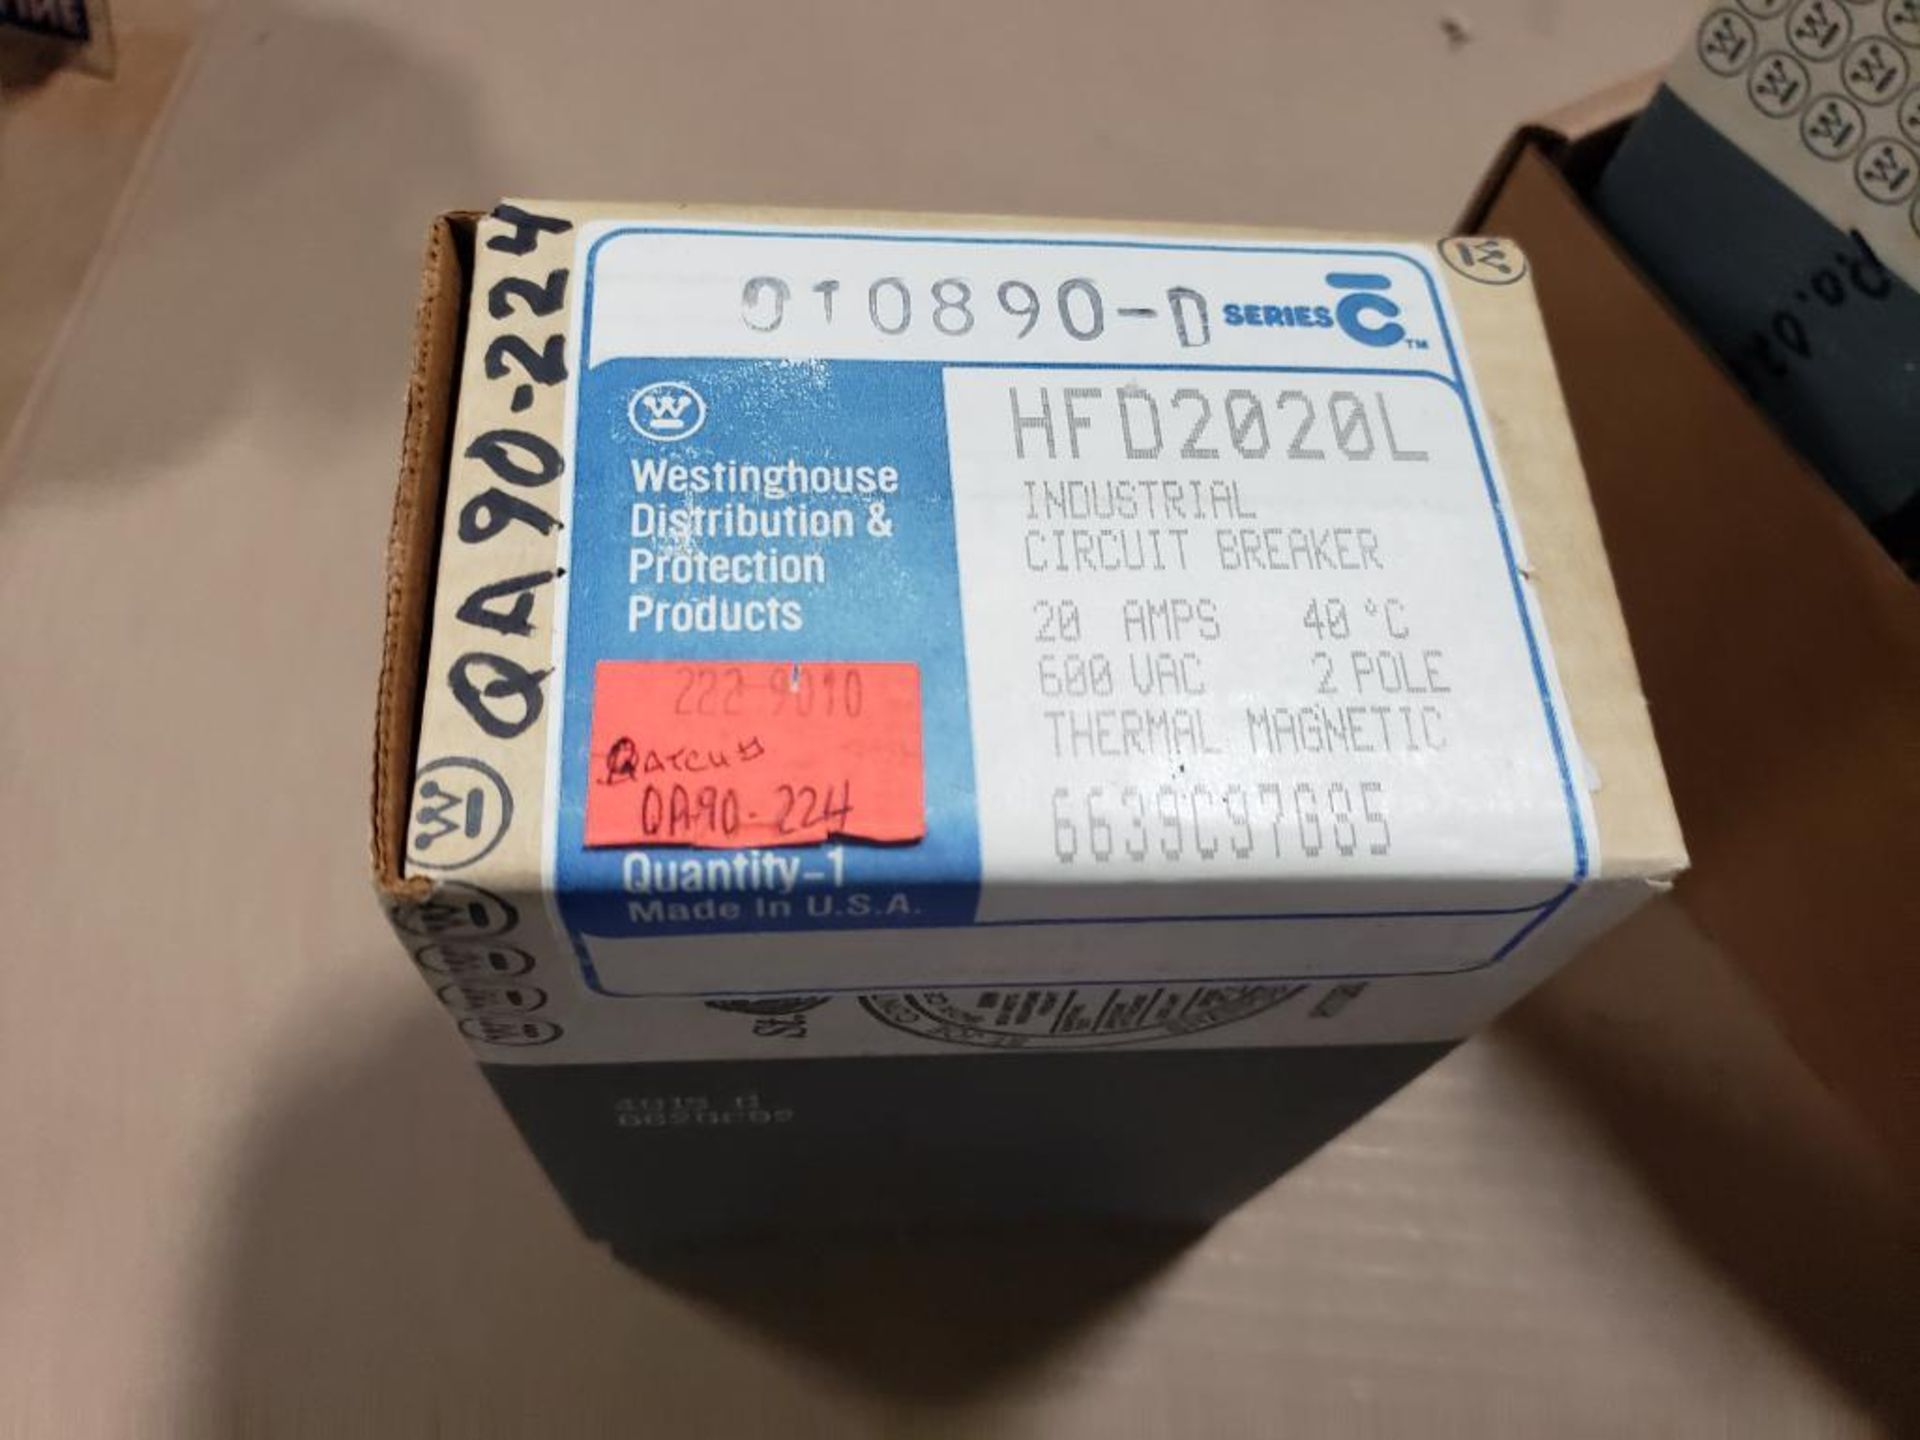 Qty 3 - Westinghouse HFD2020L industrial circuit breaker. New in box. - Image 6 of 7